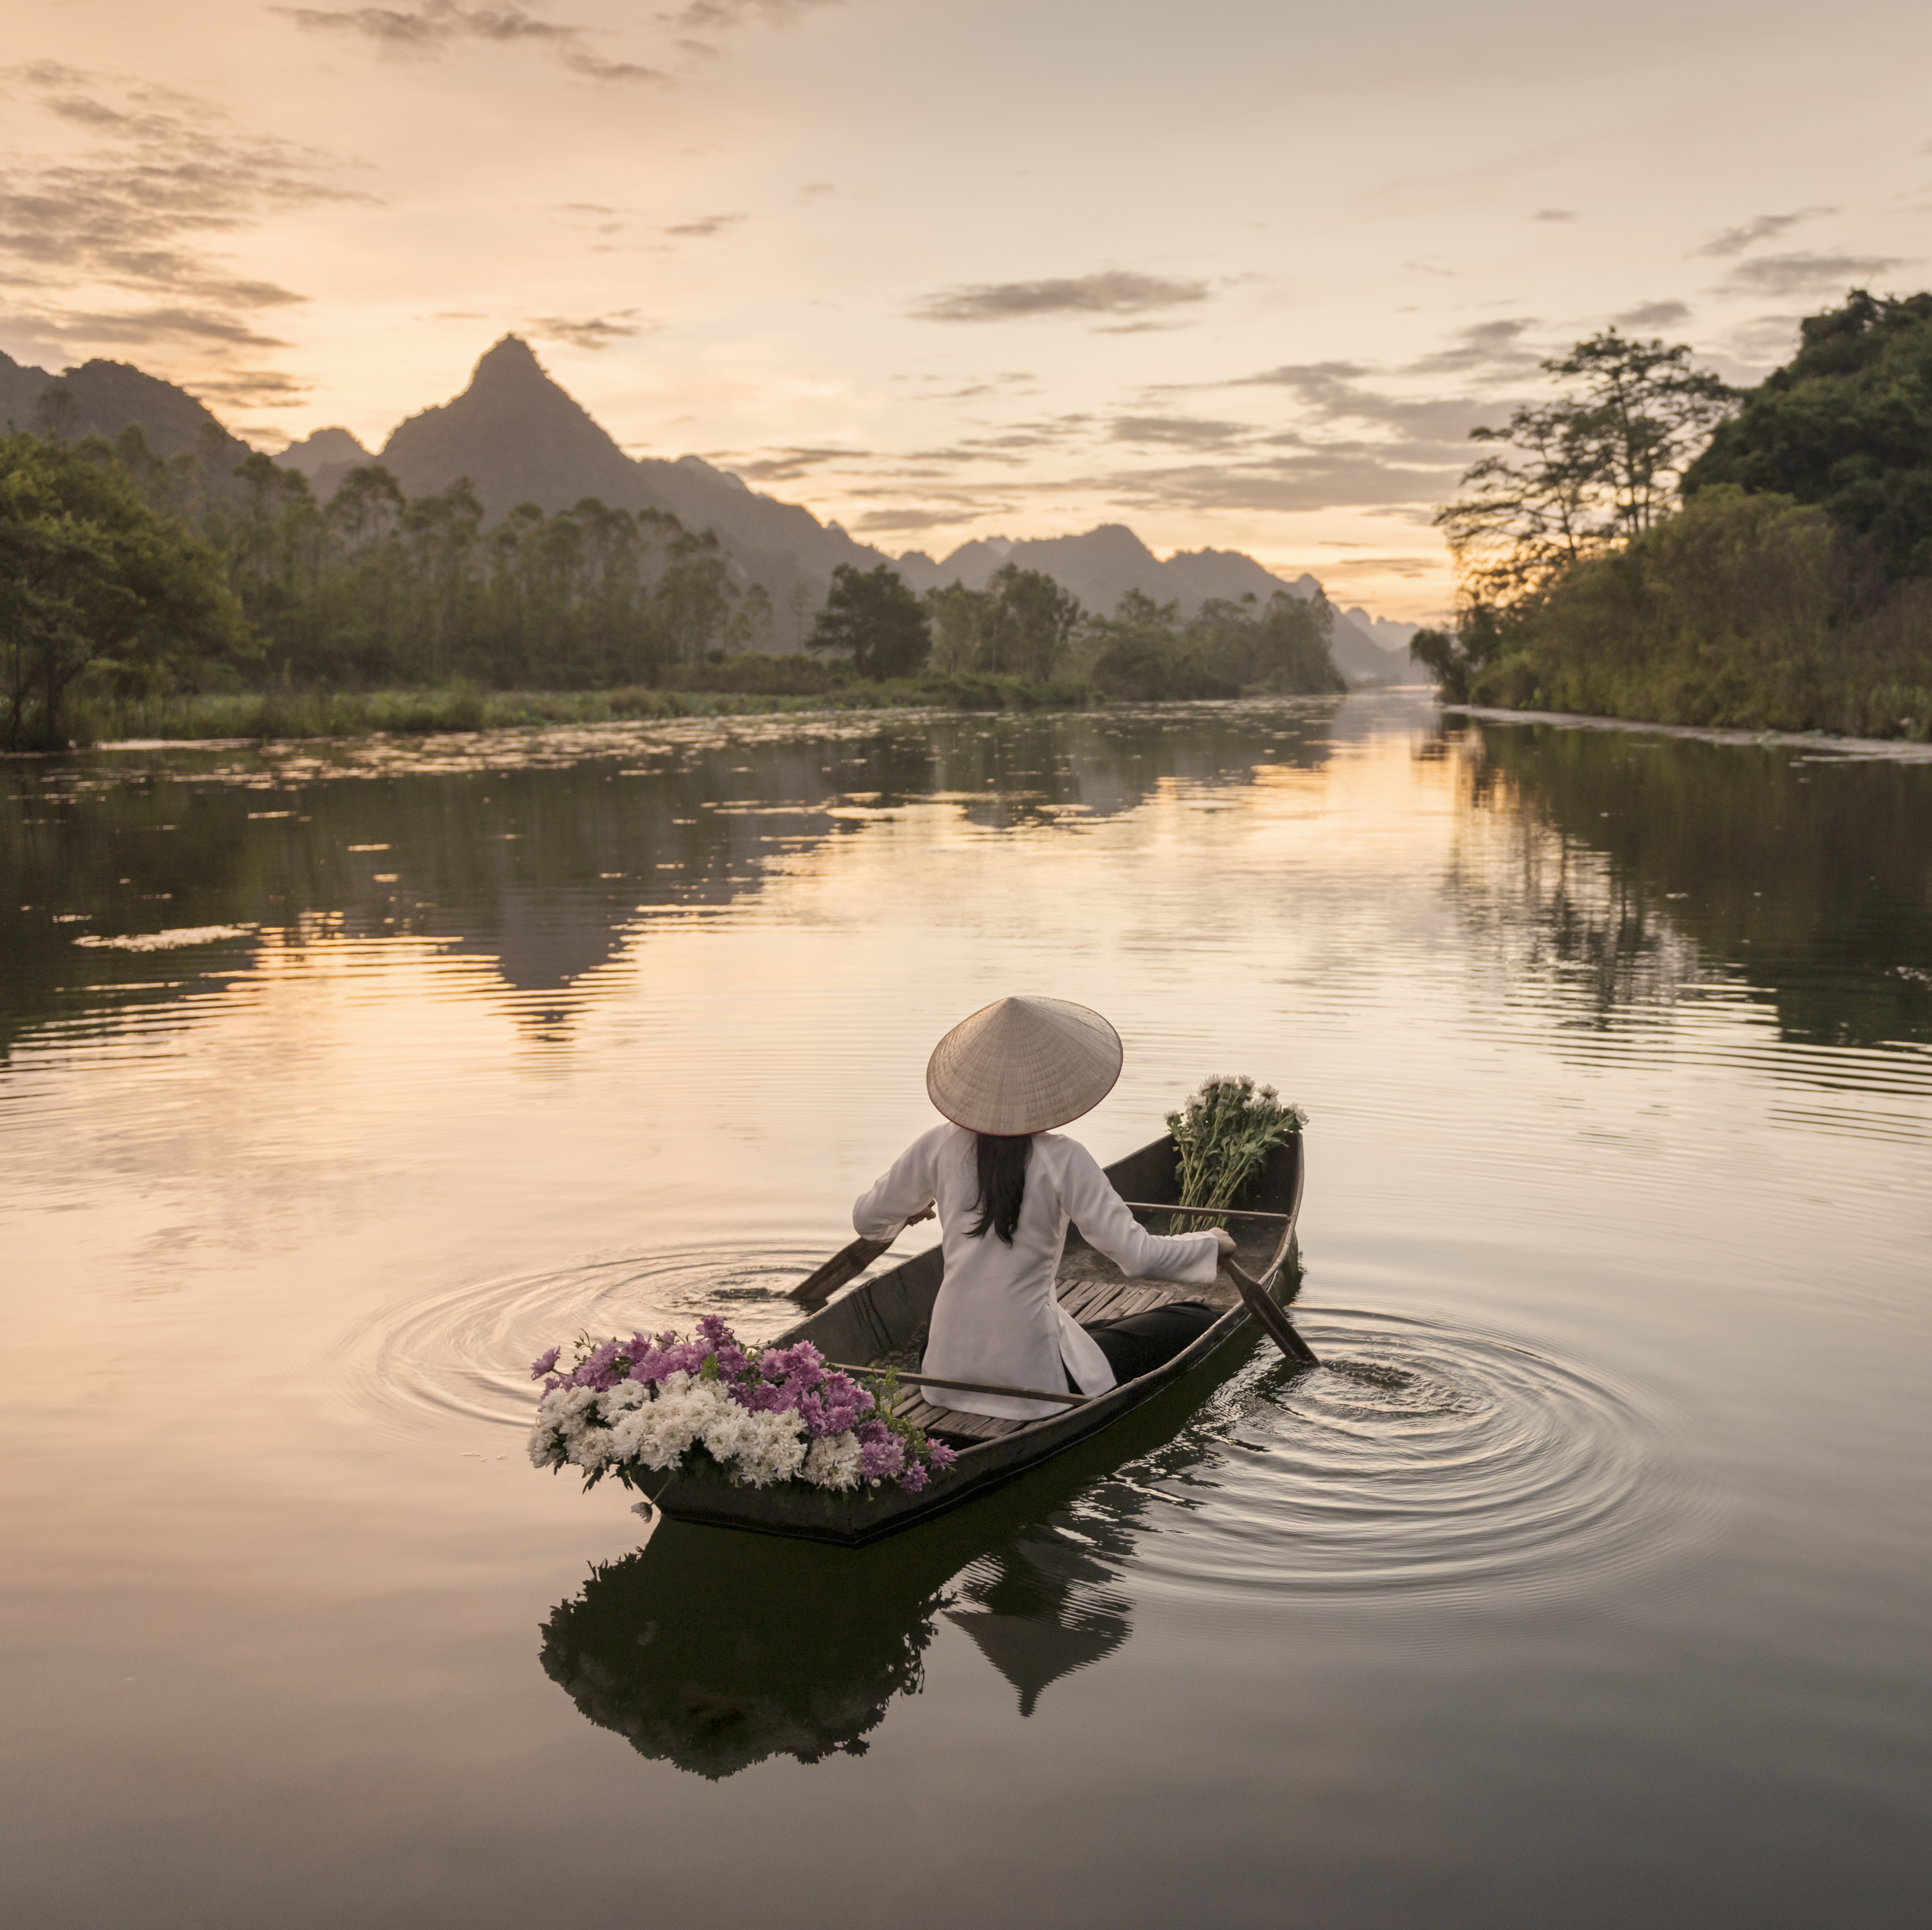 Take a tranquil boat ride down a river in Hanoi, Vietnam